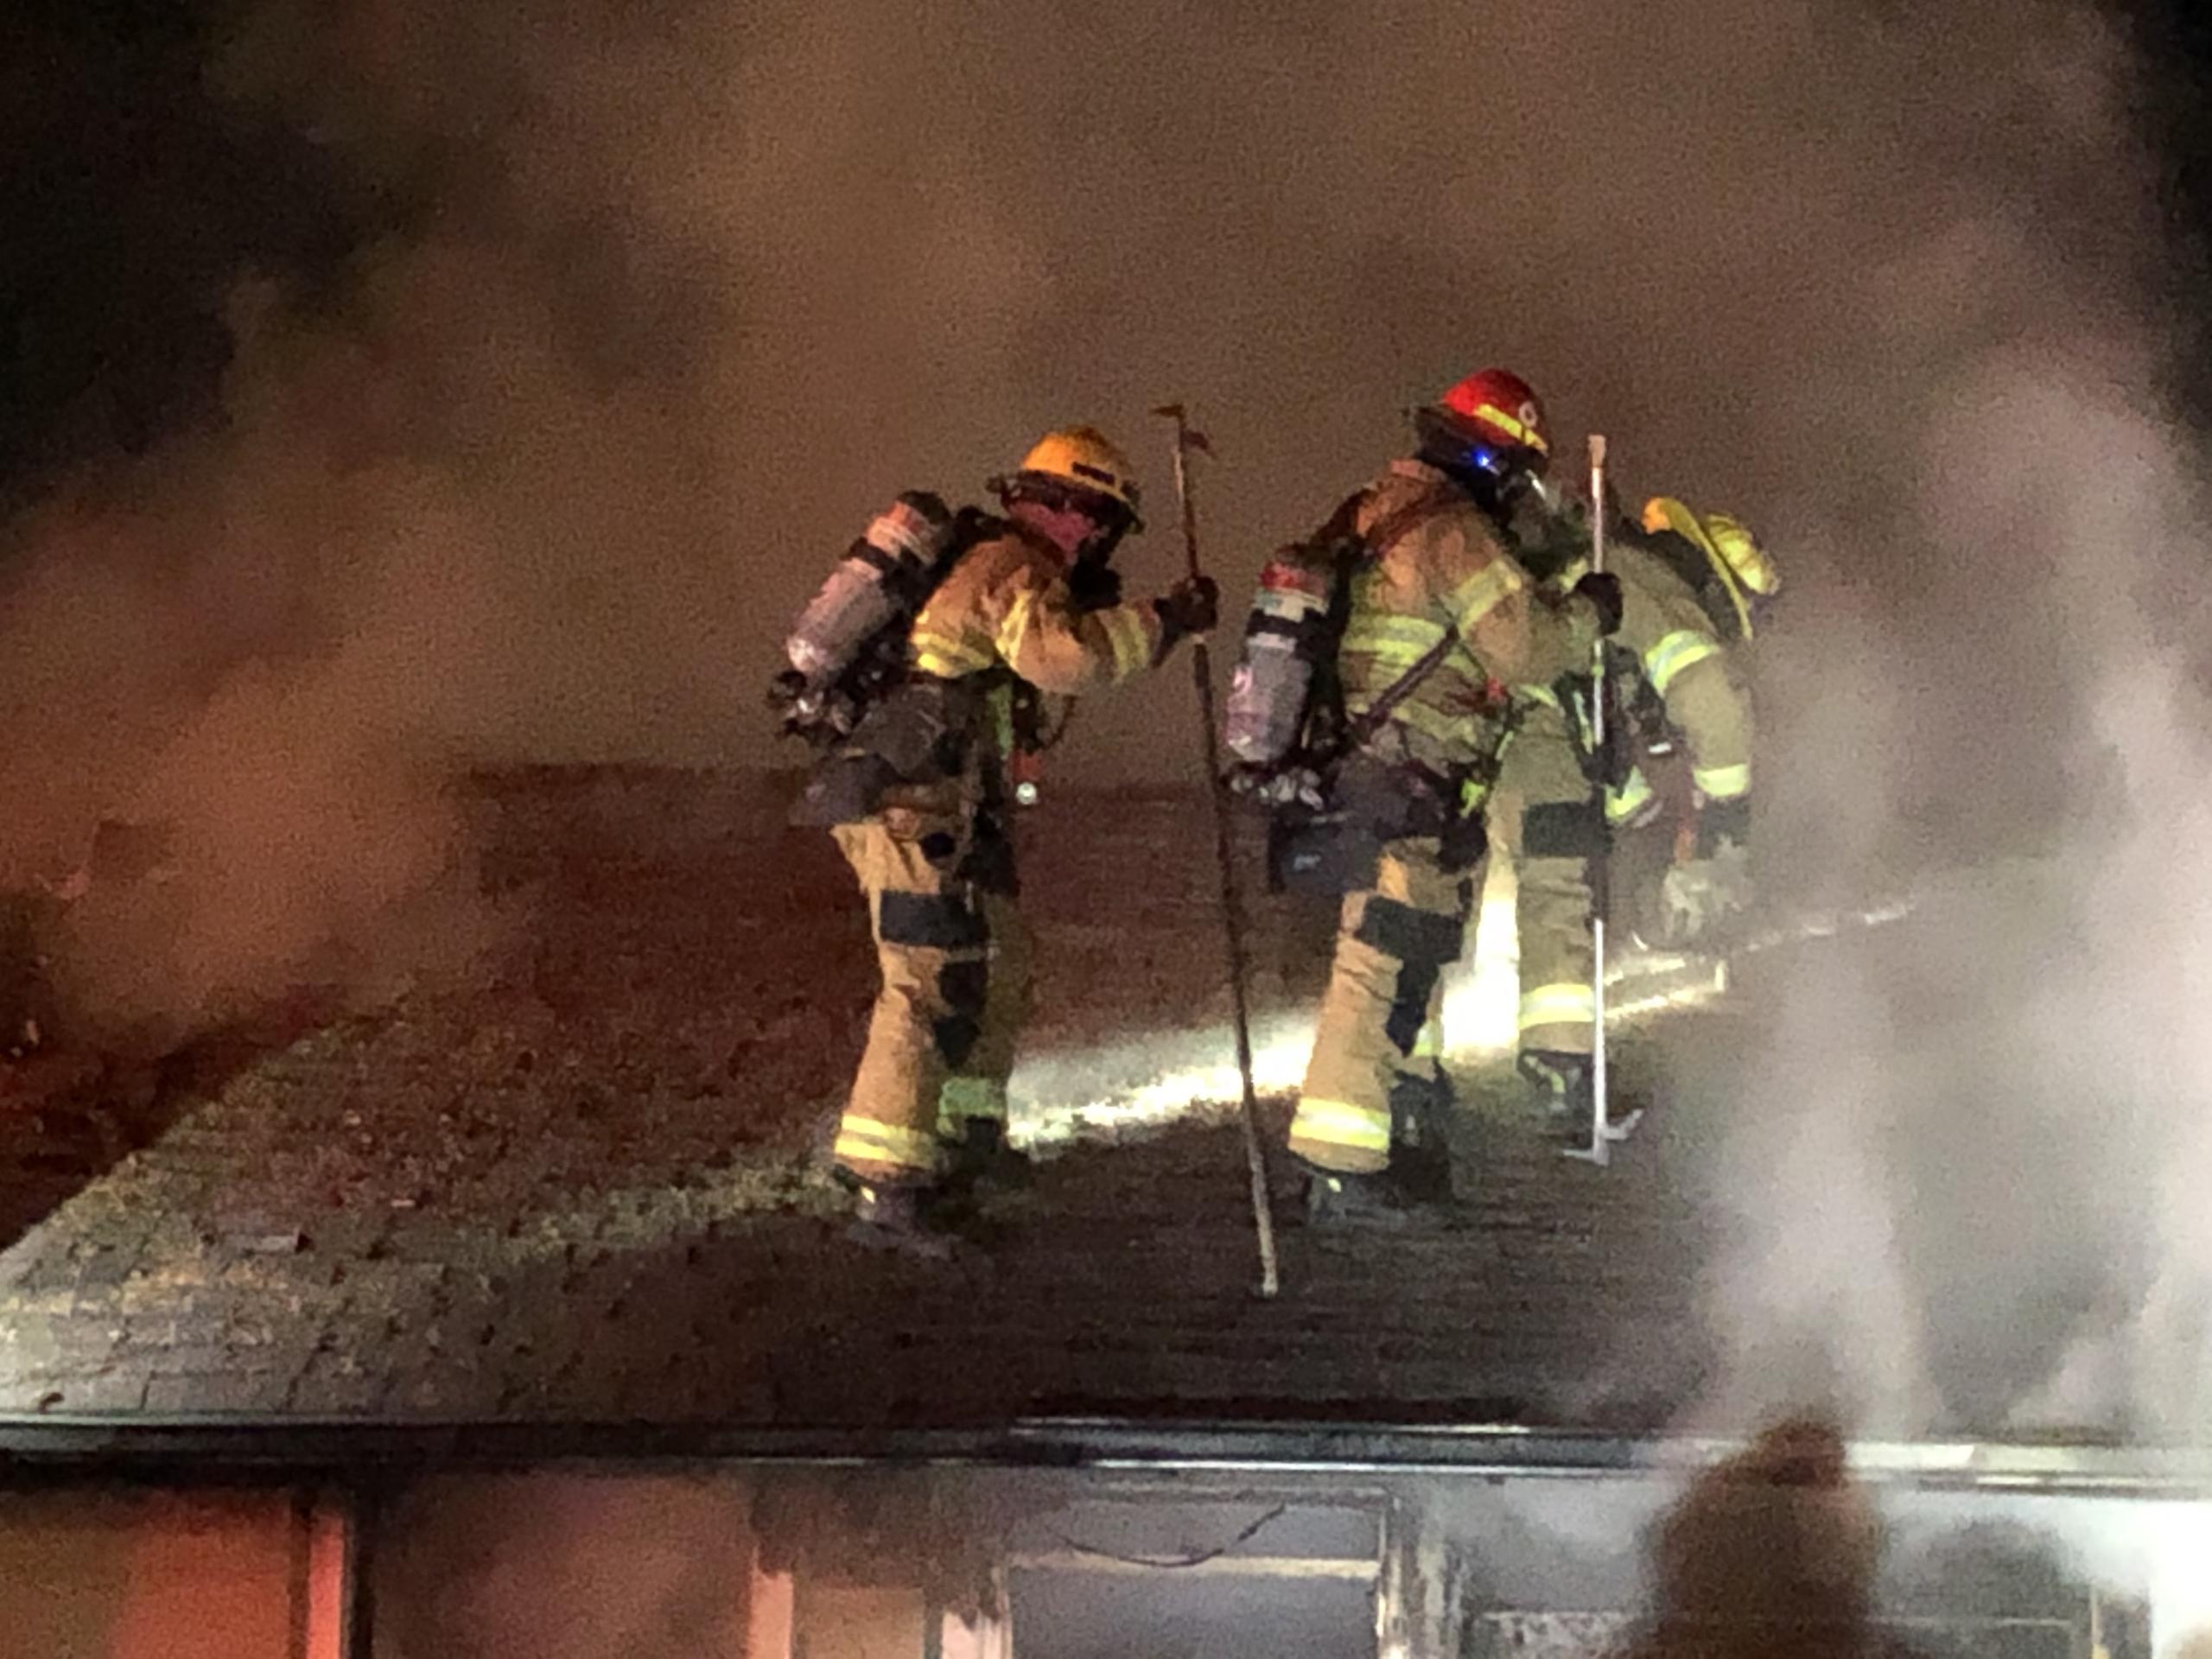 Firefighters make a "trench-cut" in the roof to stop the spread of fire in the attic.